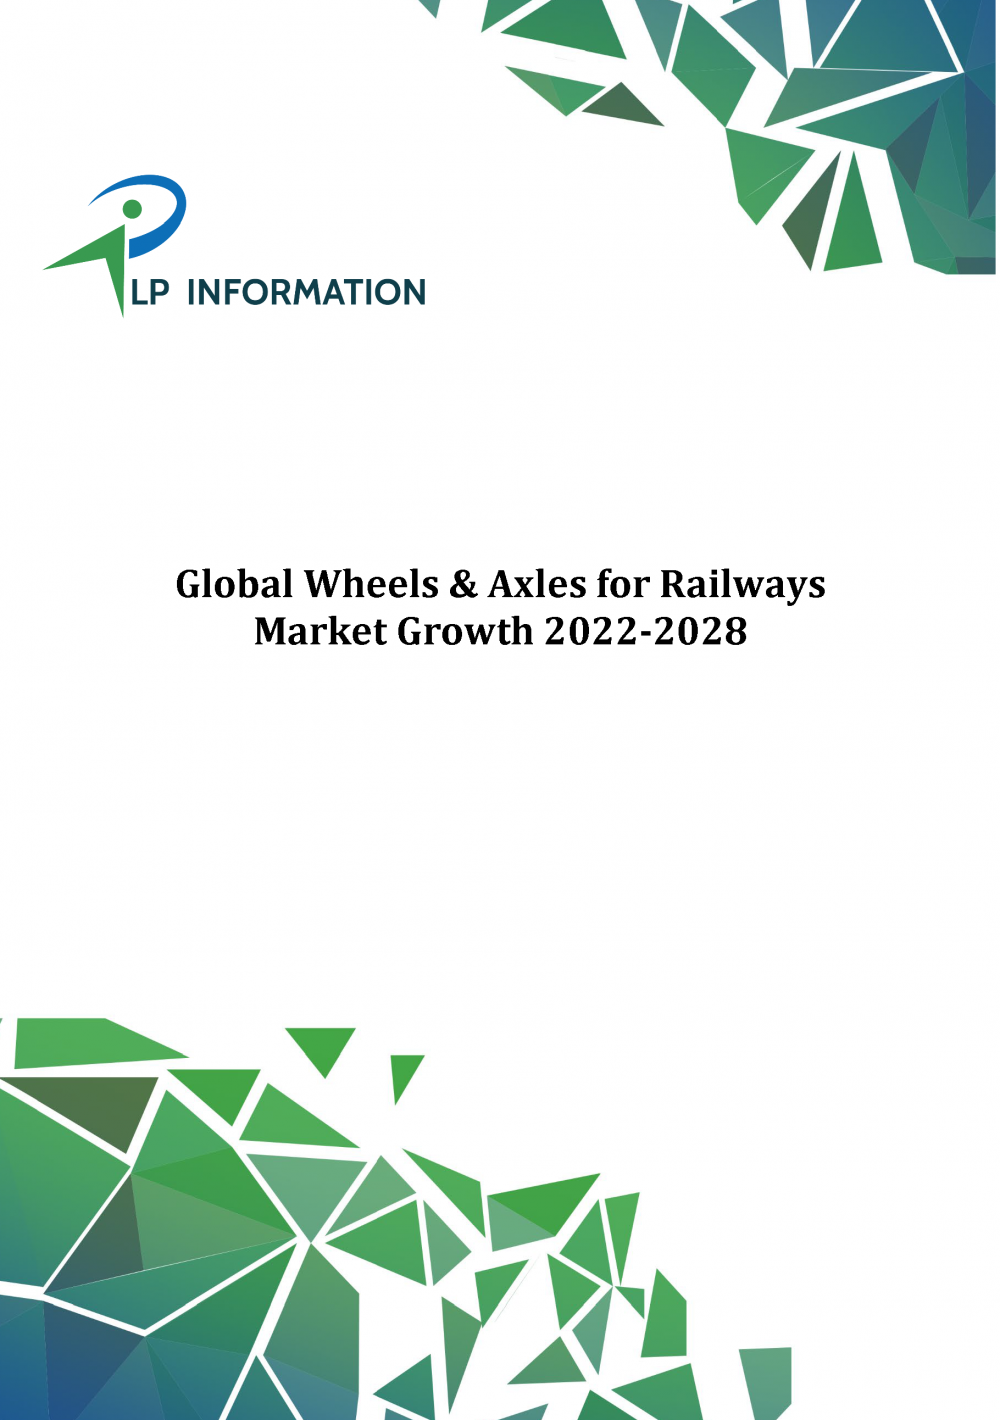 Global Wheels & Axles for Railways Market Growth 2022-2028_cover